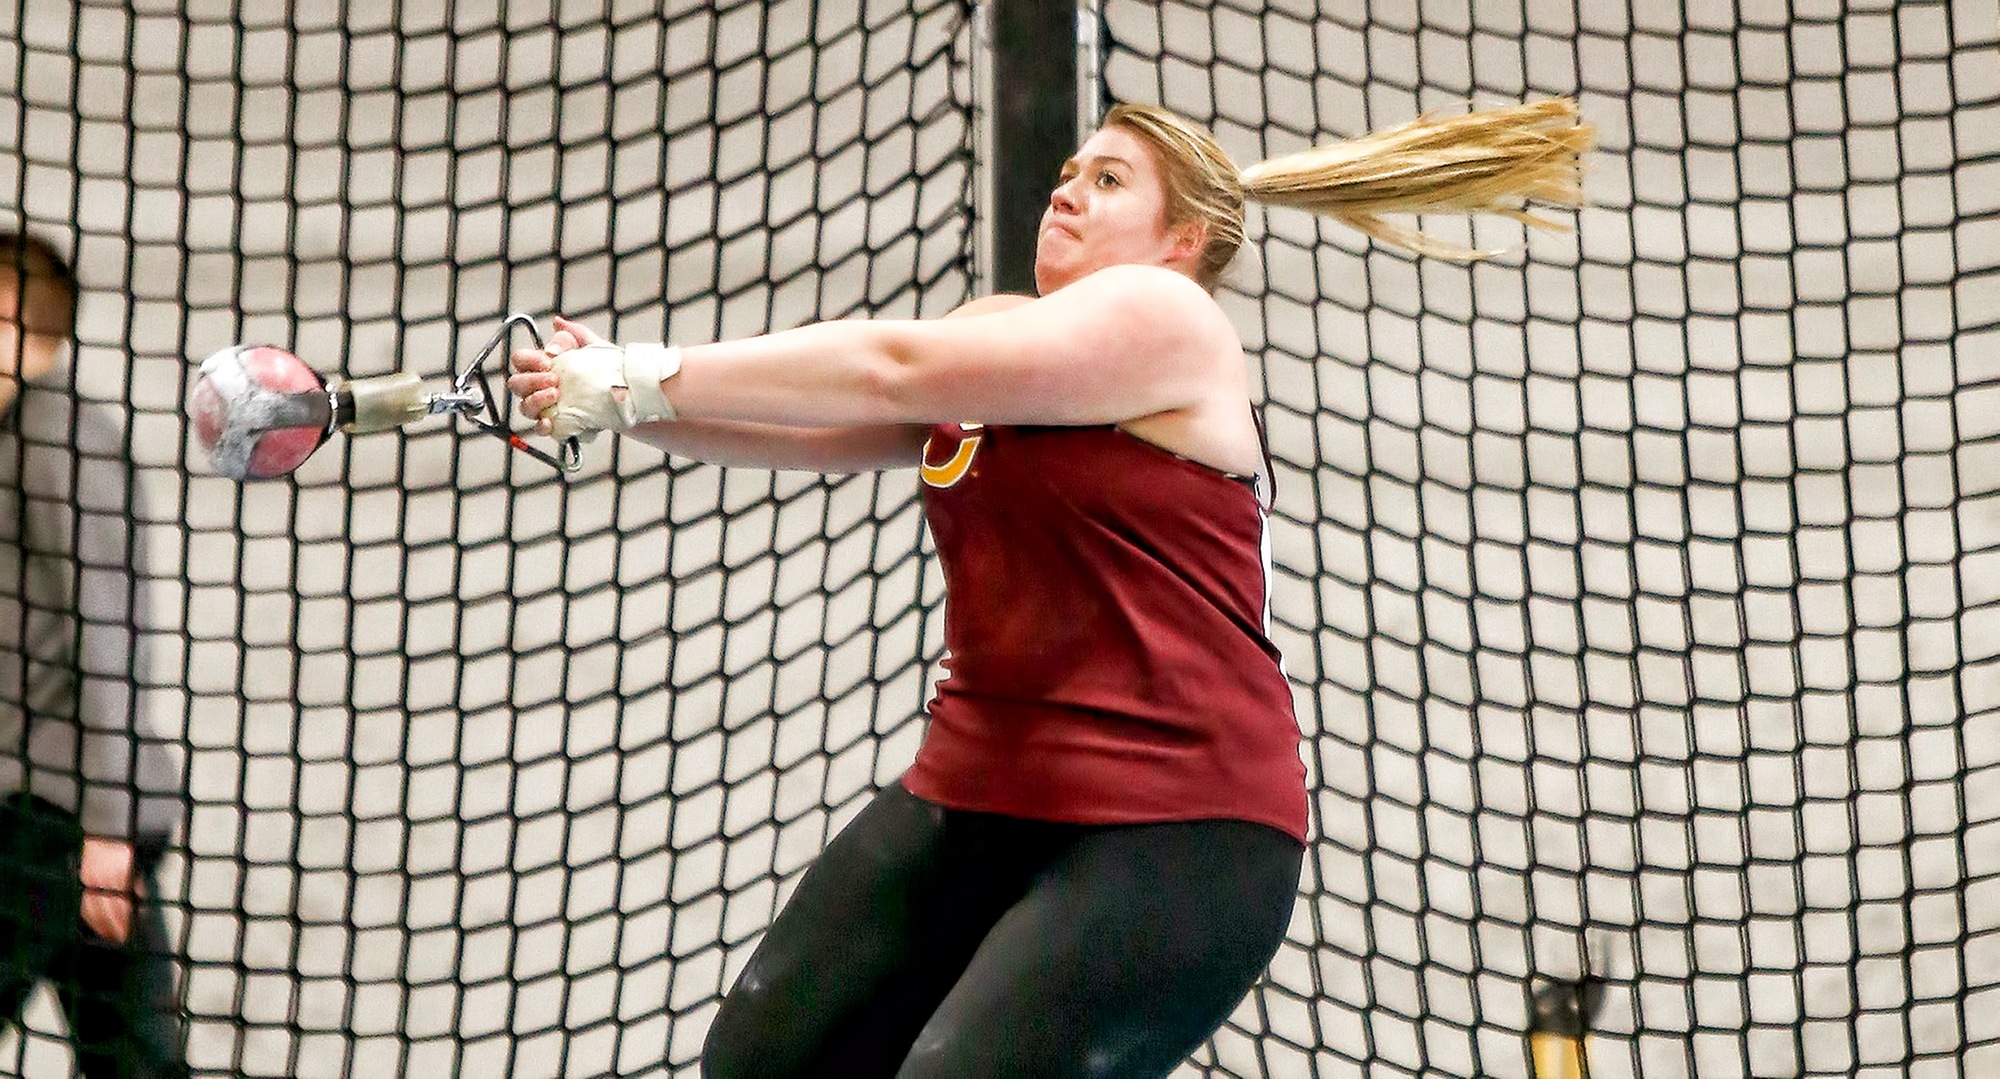 Kelsey Rajewsky posted her second straight 5th-place finish in the weight throw at the MIAC Indoor Meet. She was one of three CC athletes who went 3-4-5 in the event. (Photo courtesy of Nathan Lodermeier)